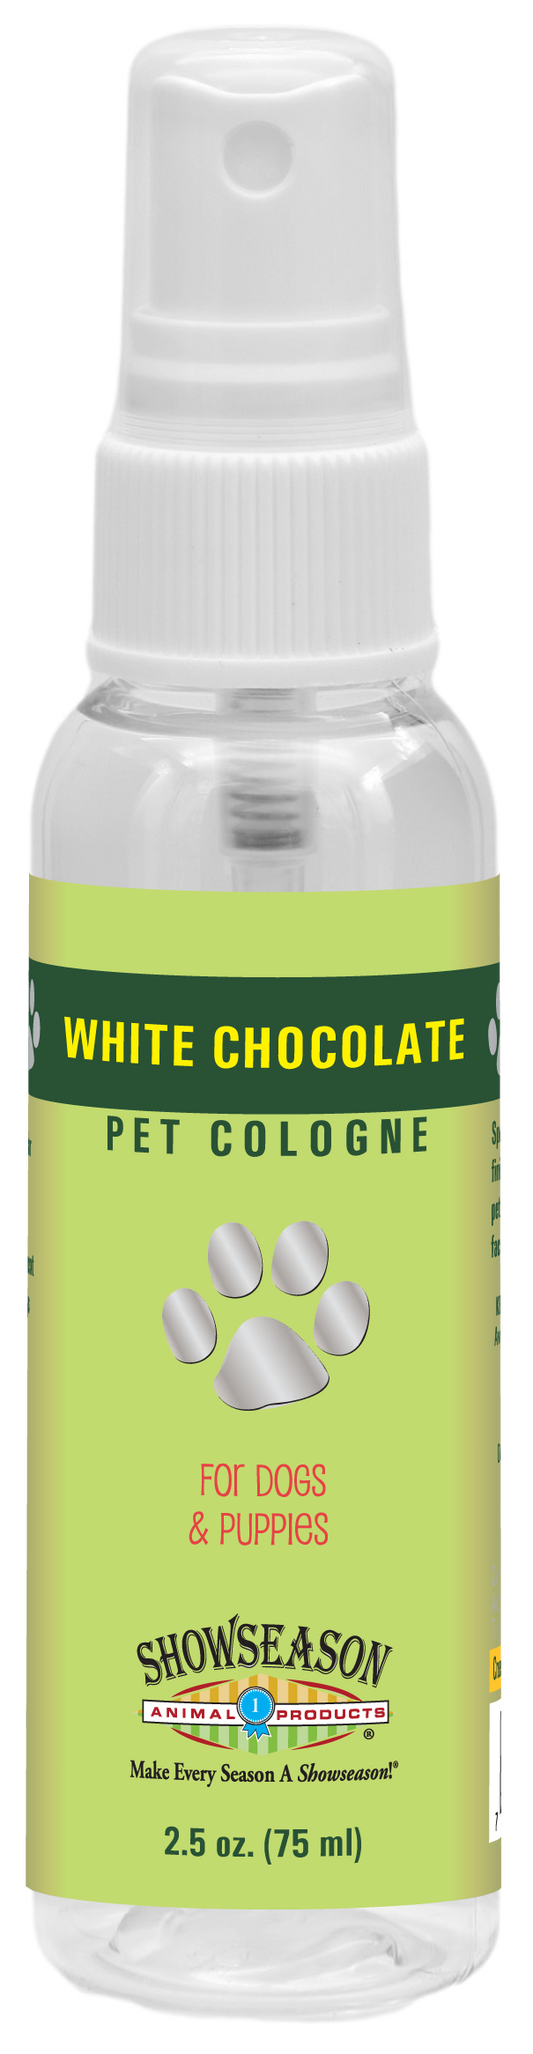 White Chocolate Pet Cologne | Showseason®